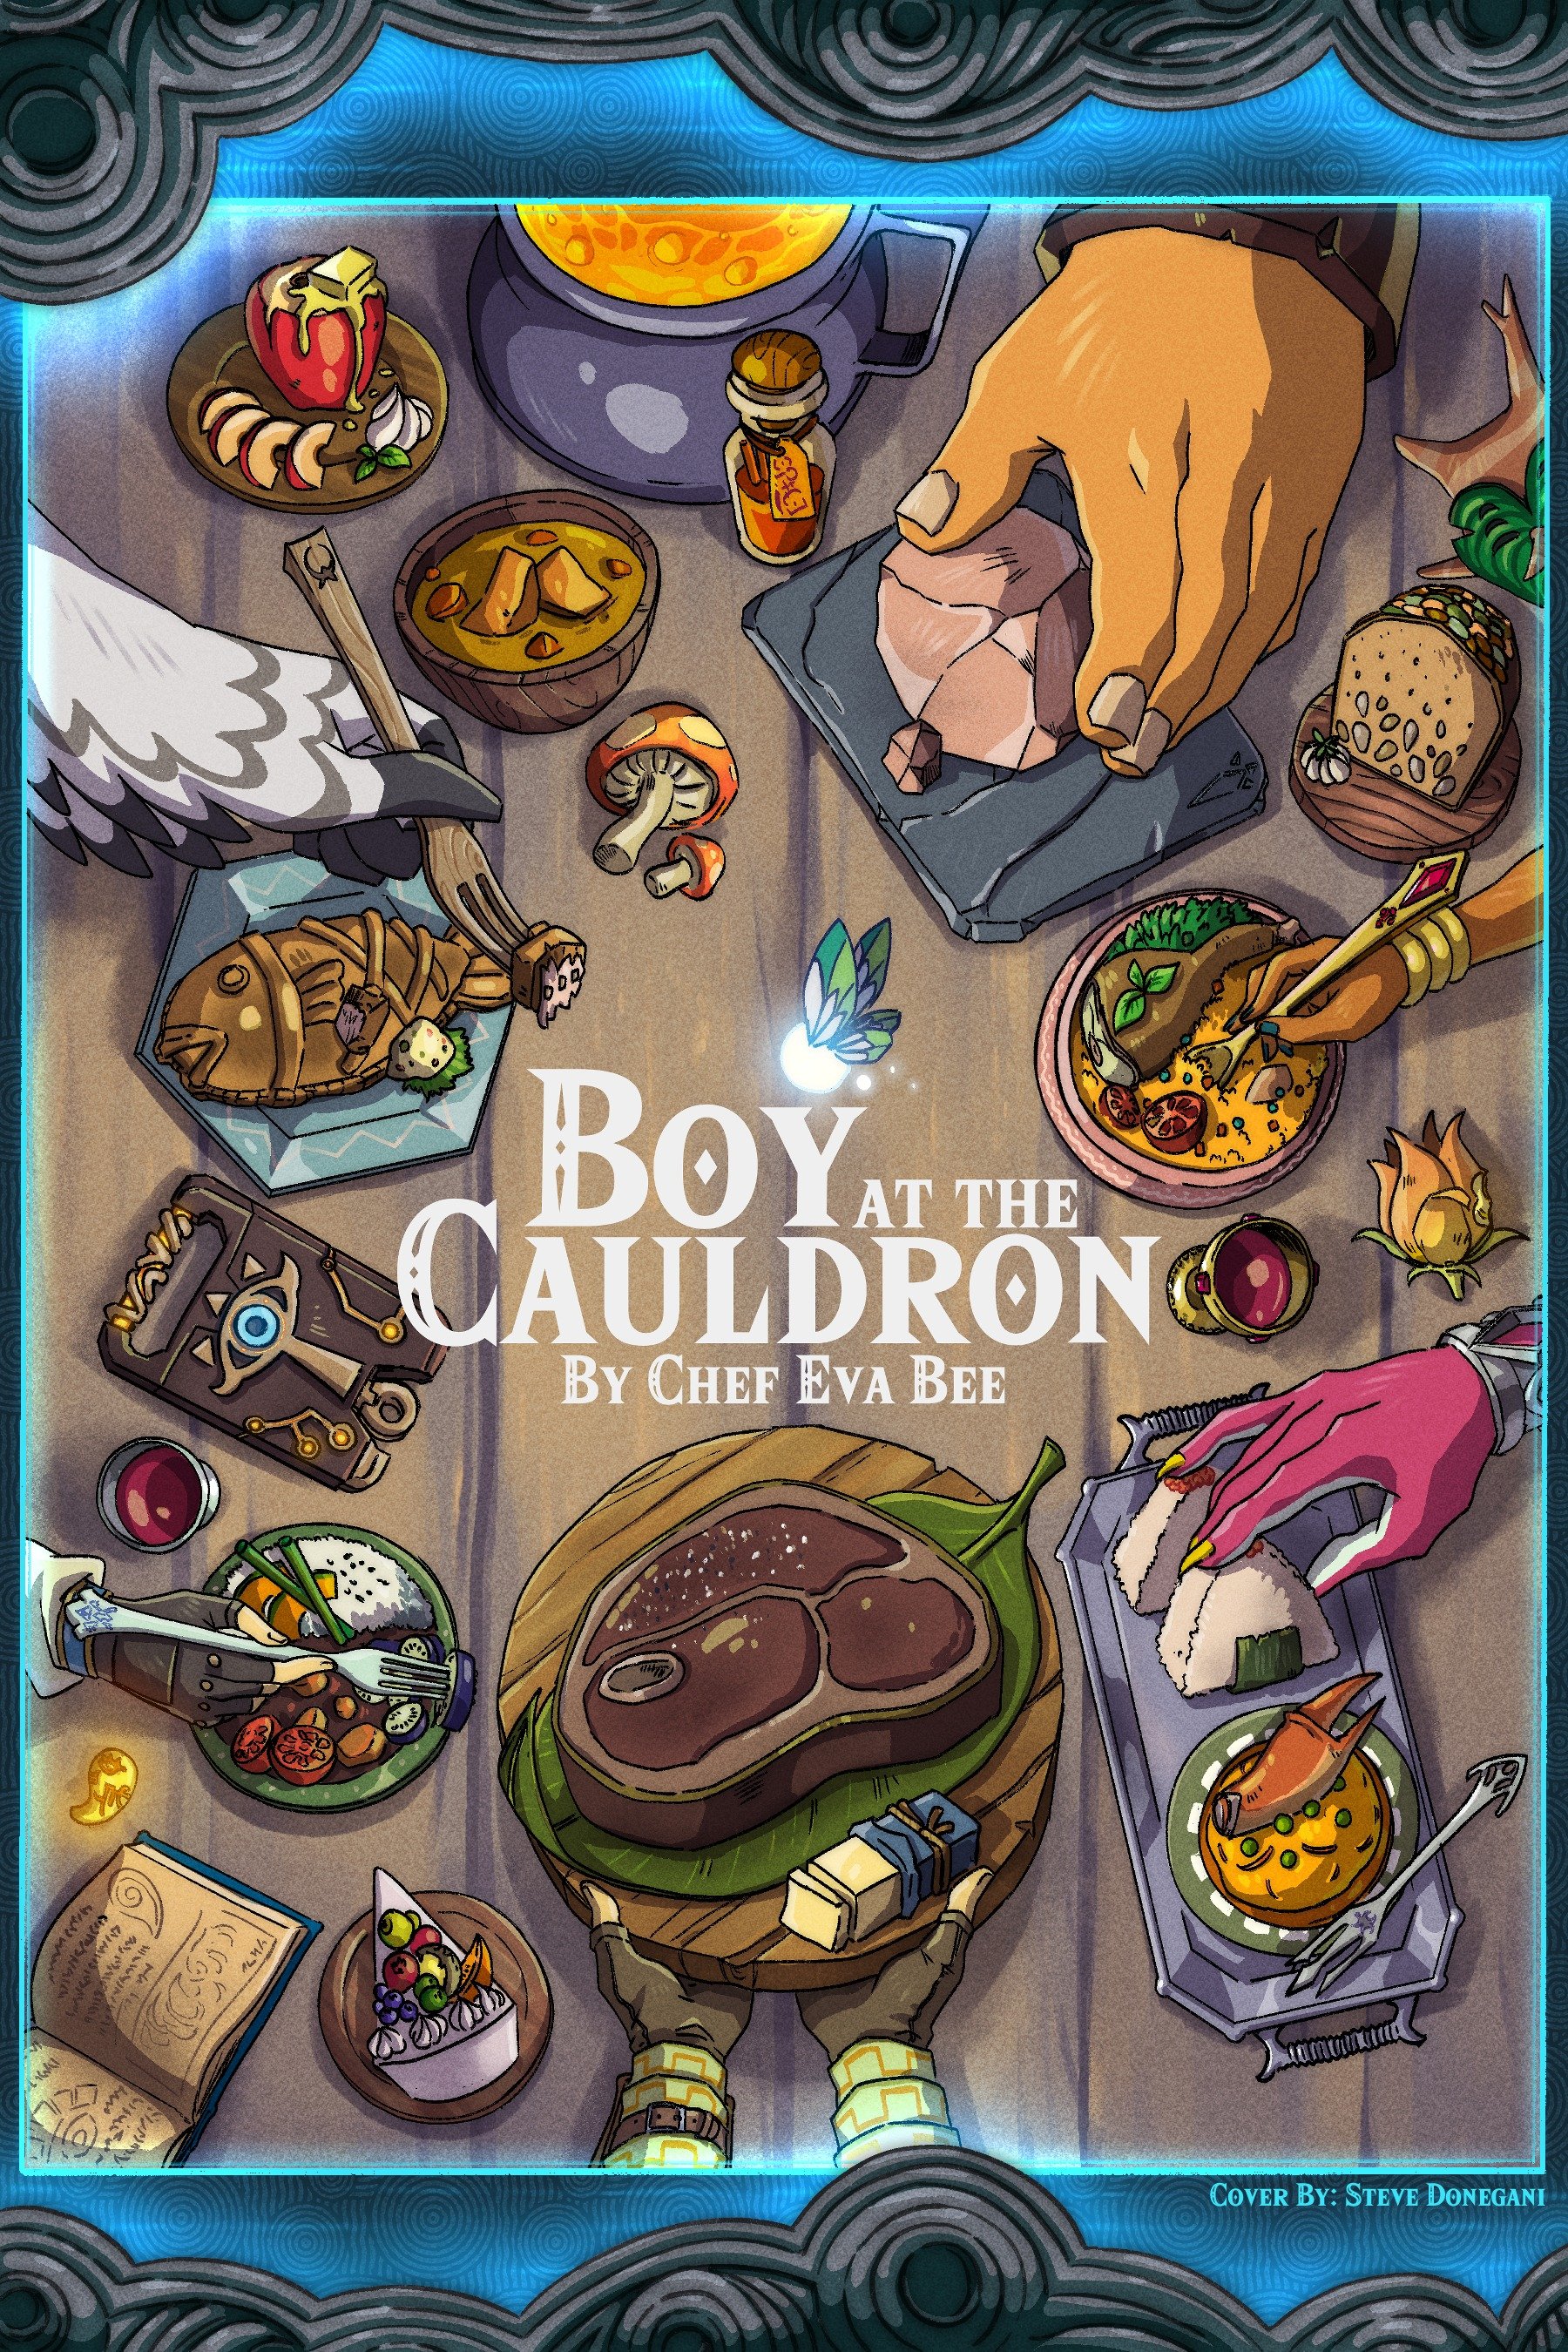 All Recipes and Cookbook - The Legend of Zelda: Breath of the Wild